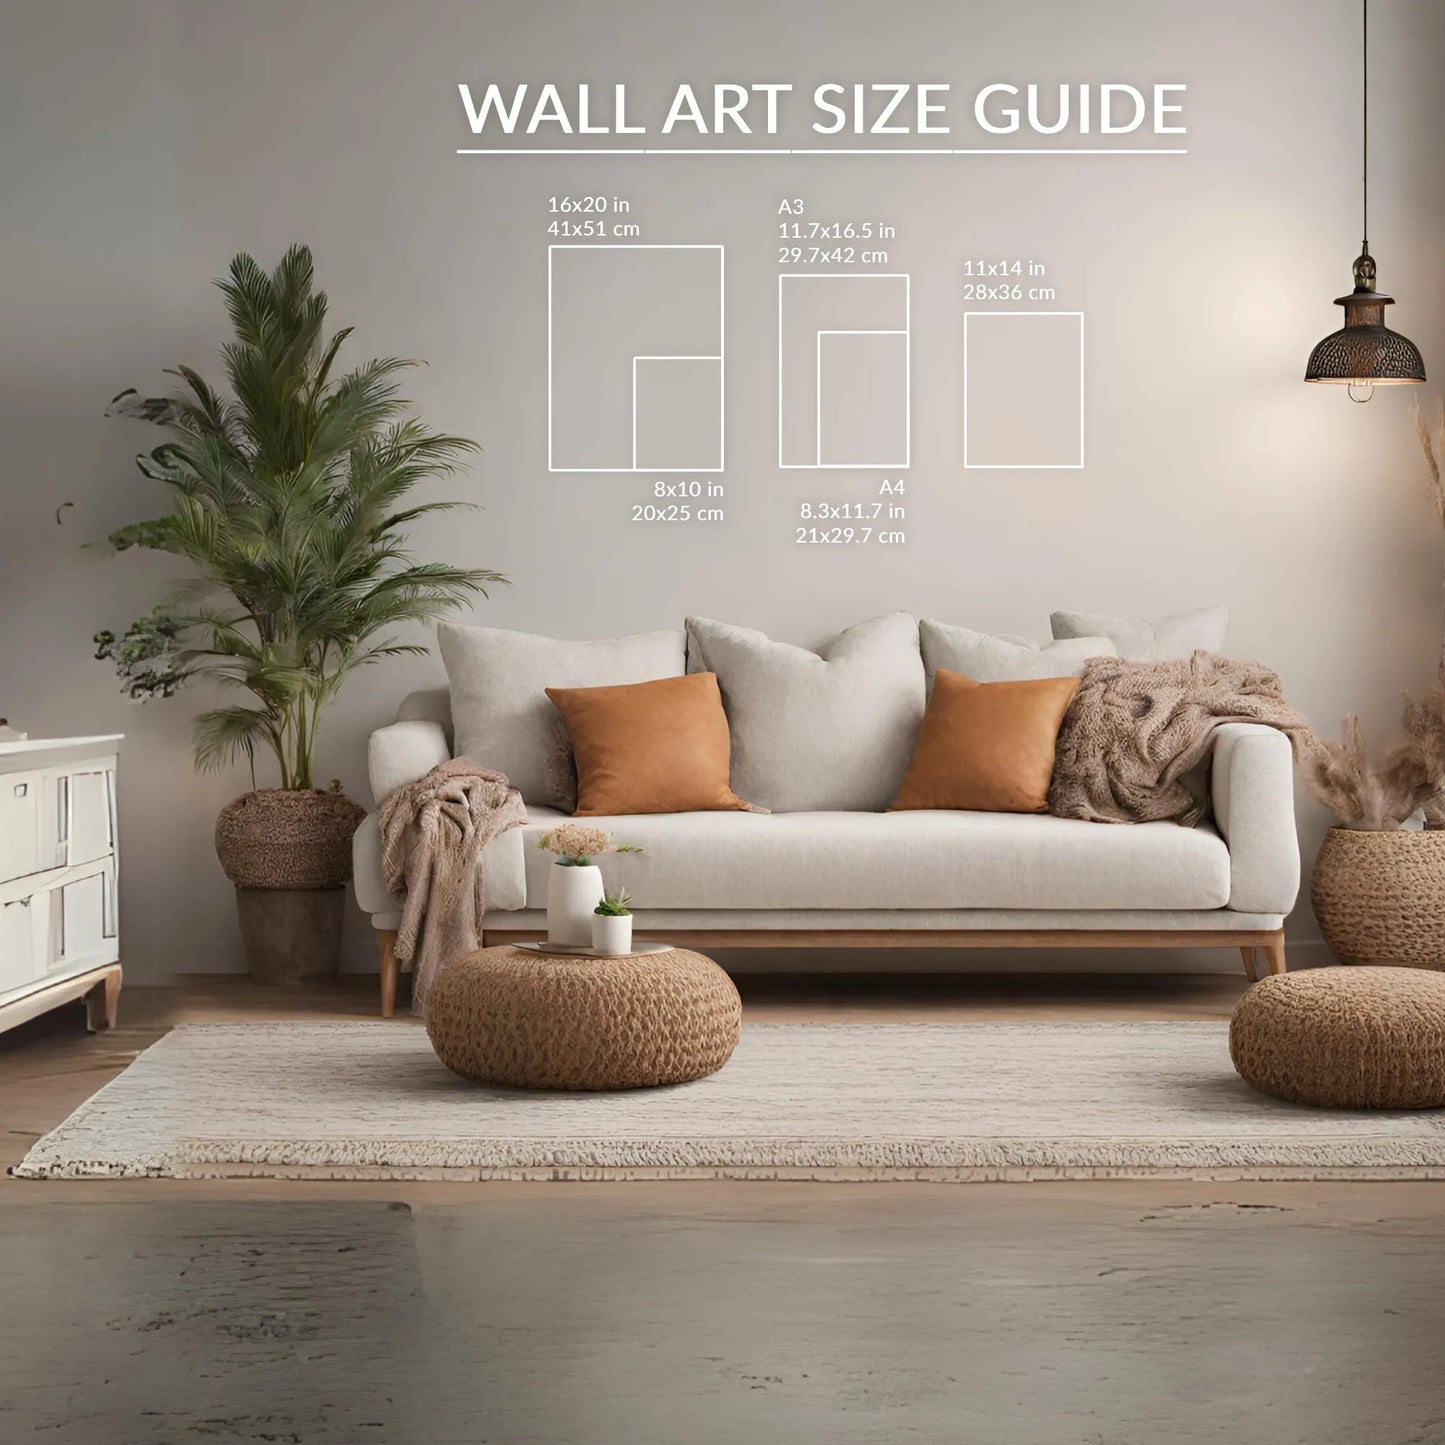 DIY Photo Collage Template Wall Art Size Guide